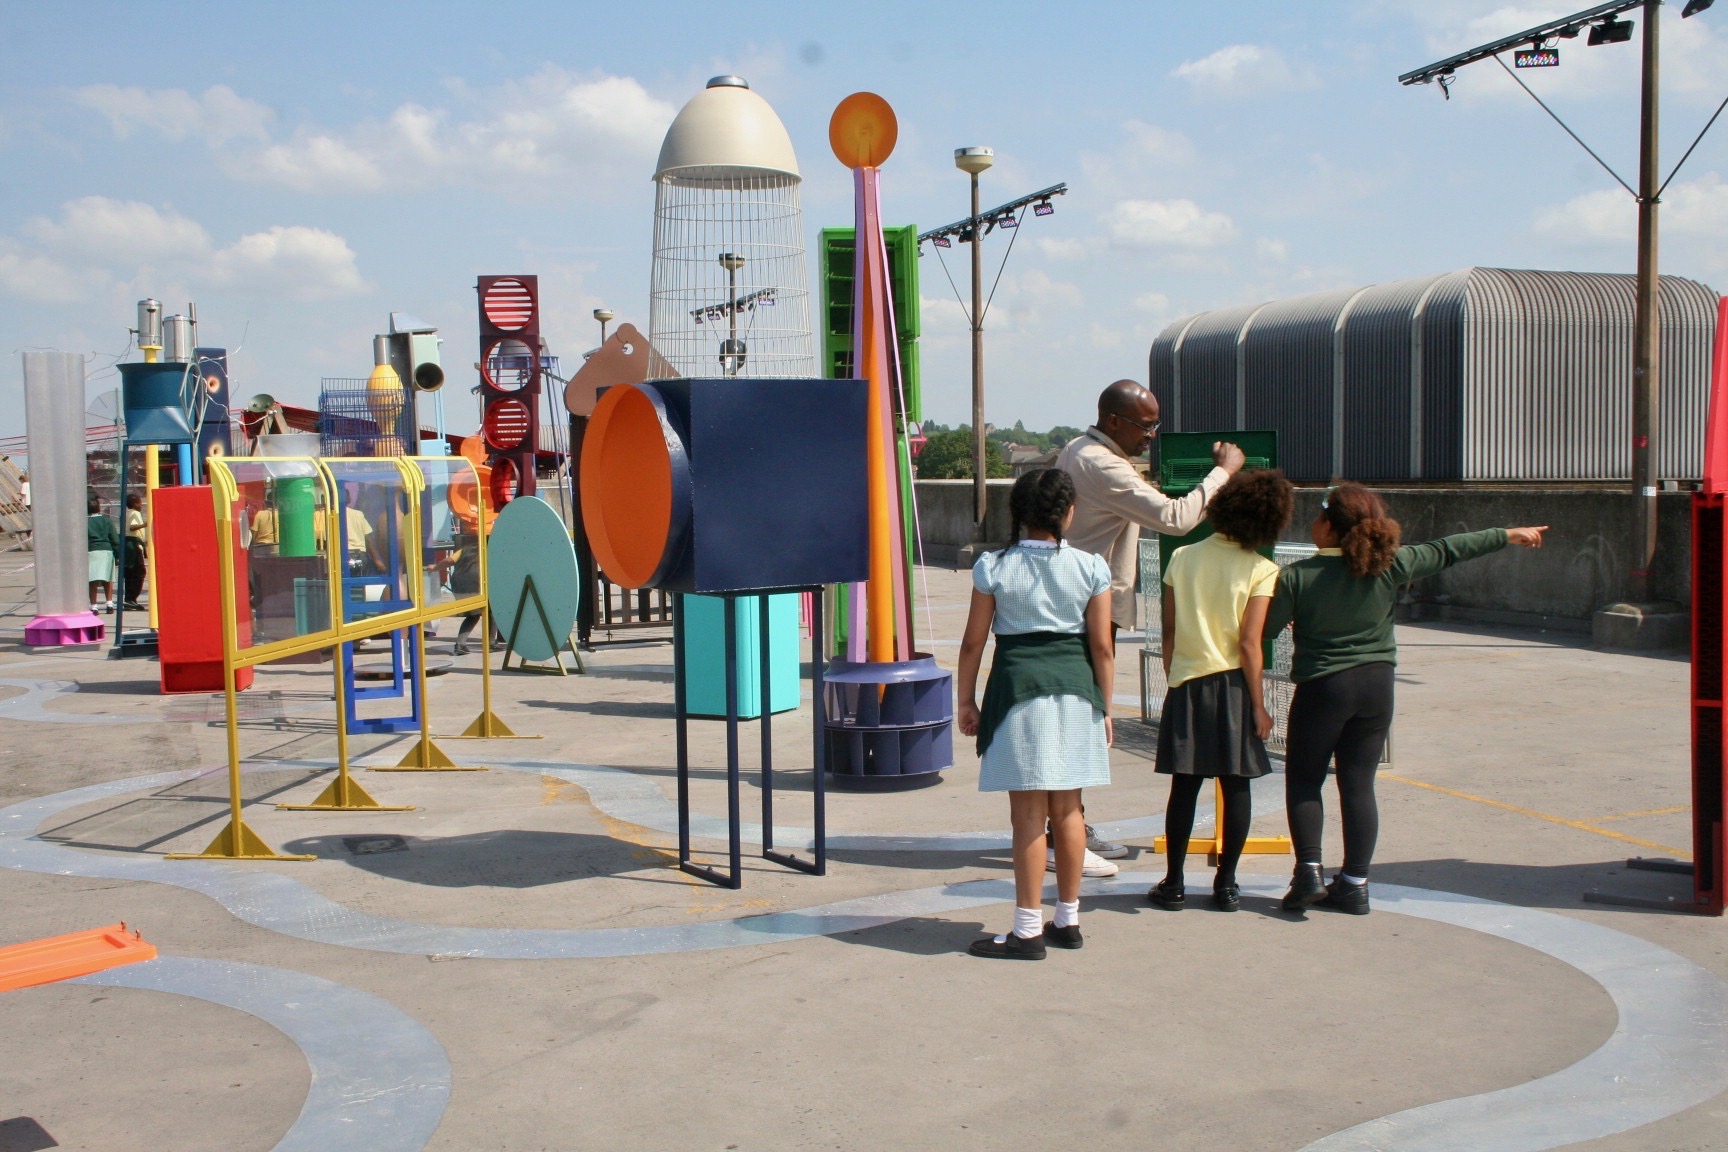 ID: three young school children are escorted through a colourful art installation made from repurposed and painted waste products. The installation is on top of a concrete rooftop with clear blue skies in the background.